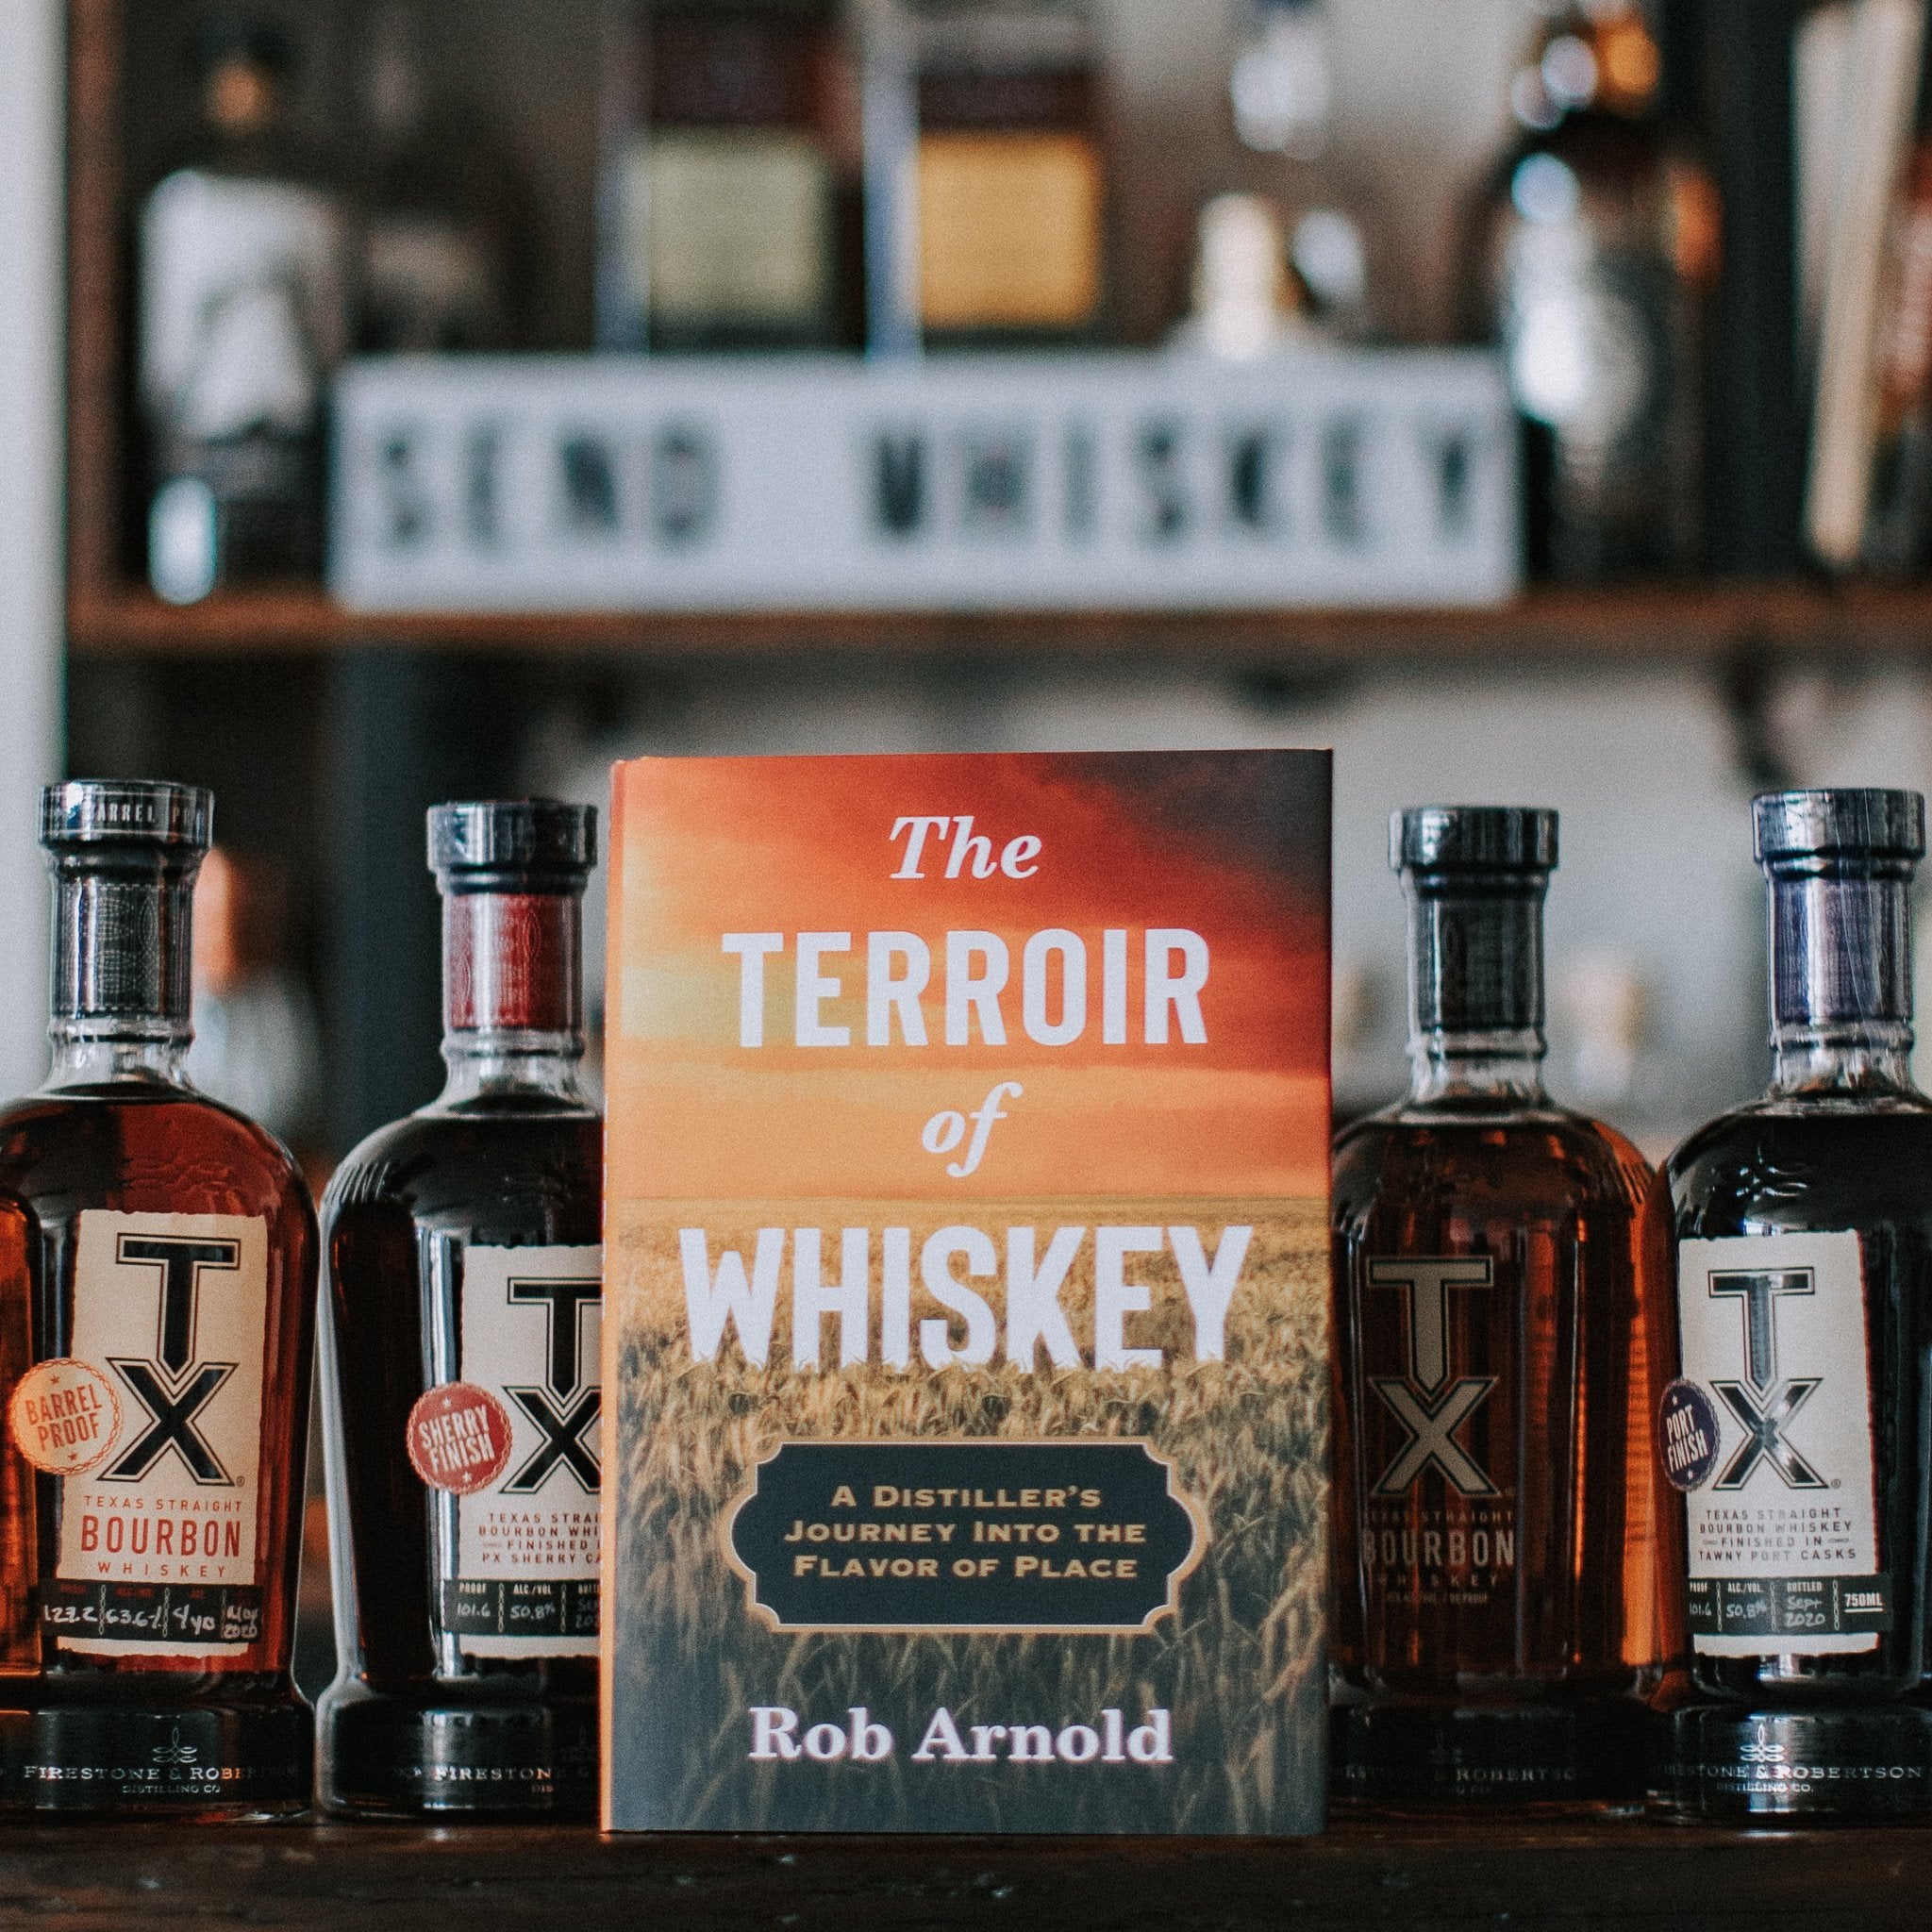 Send Whiskey Podcast #8 - Talking Terroir of Whiskey With Rob Arnold